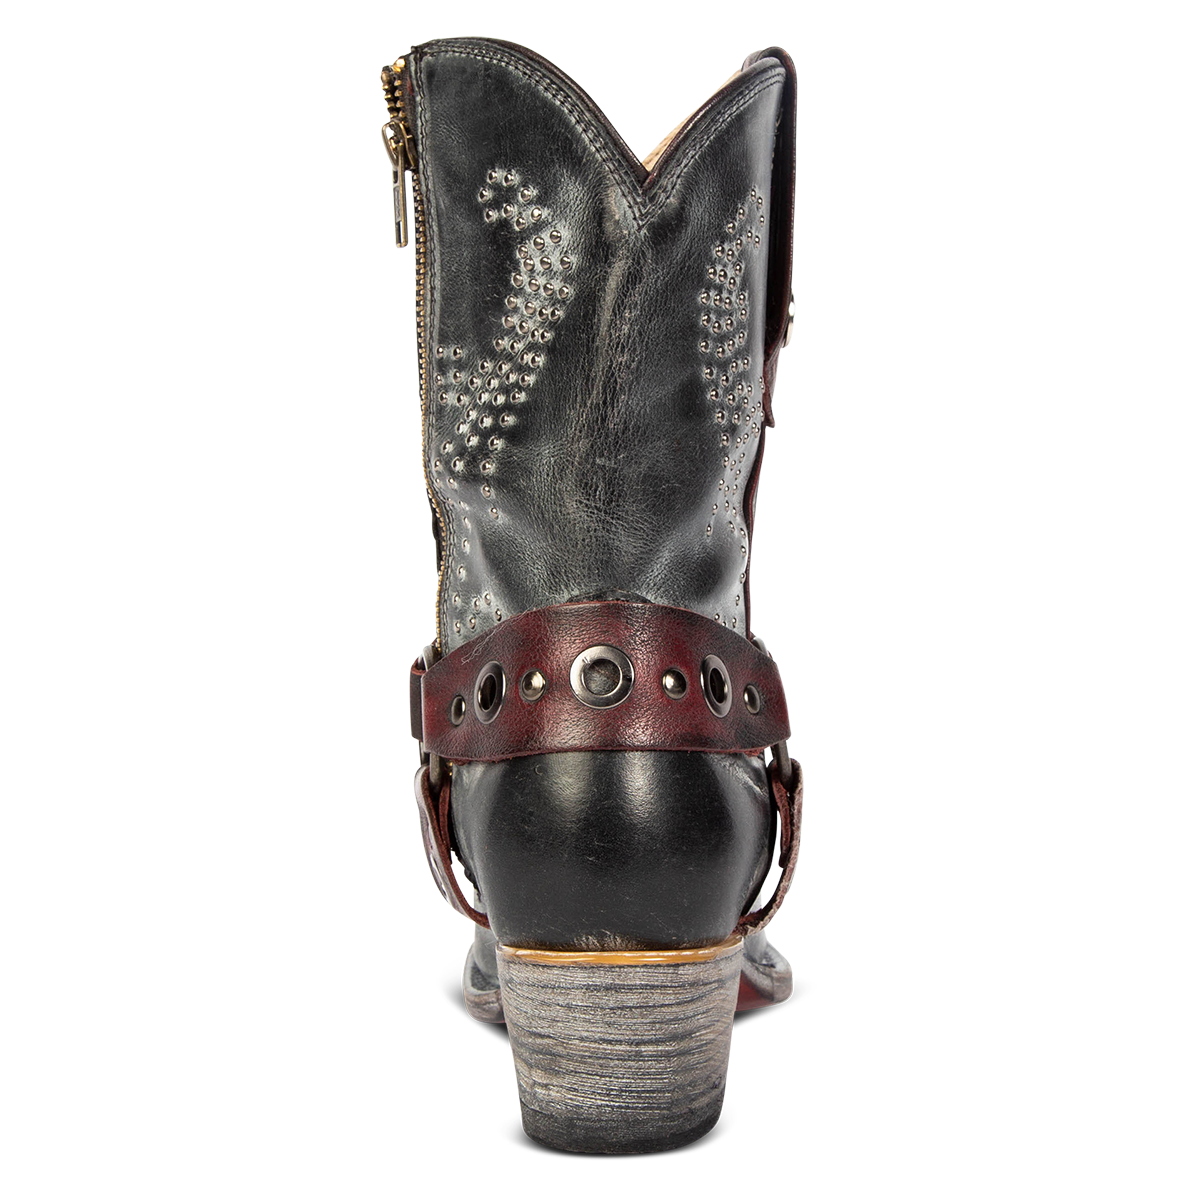 Back view showing western crown and embellished shaft on FREEBIRD women's Weston black leather mid calf cowgirl bootie